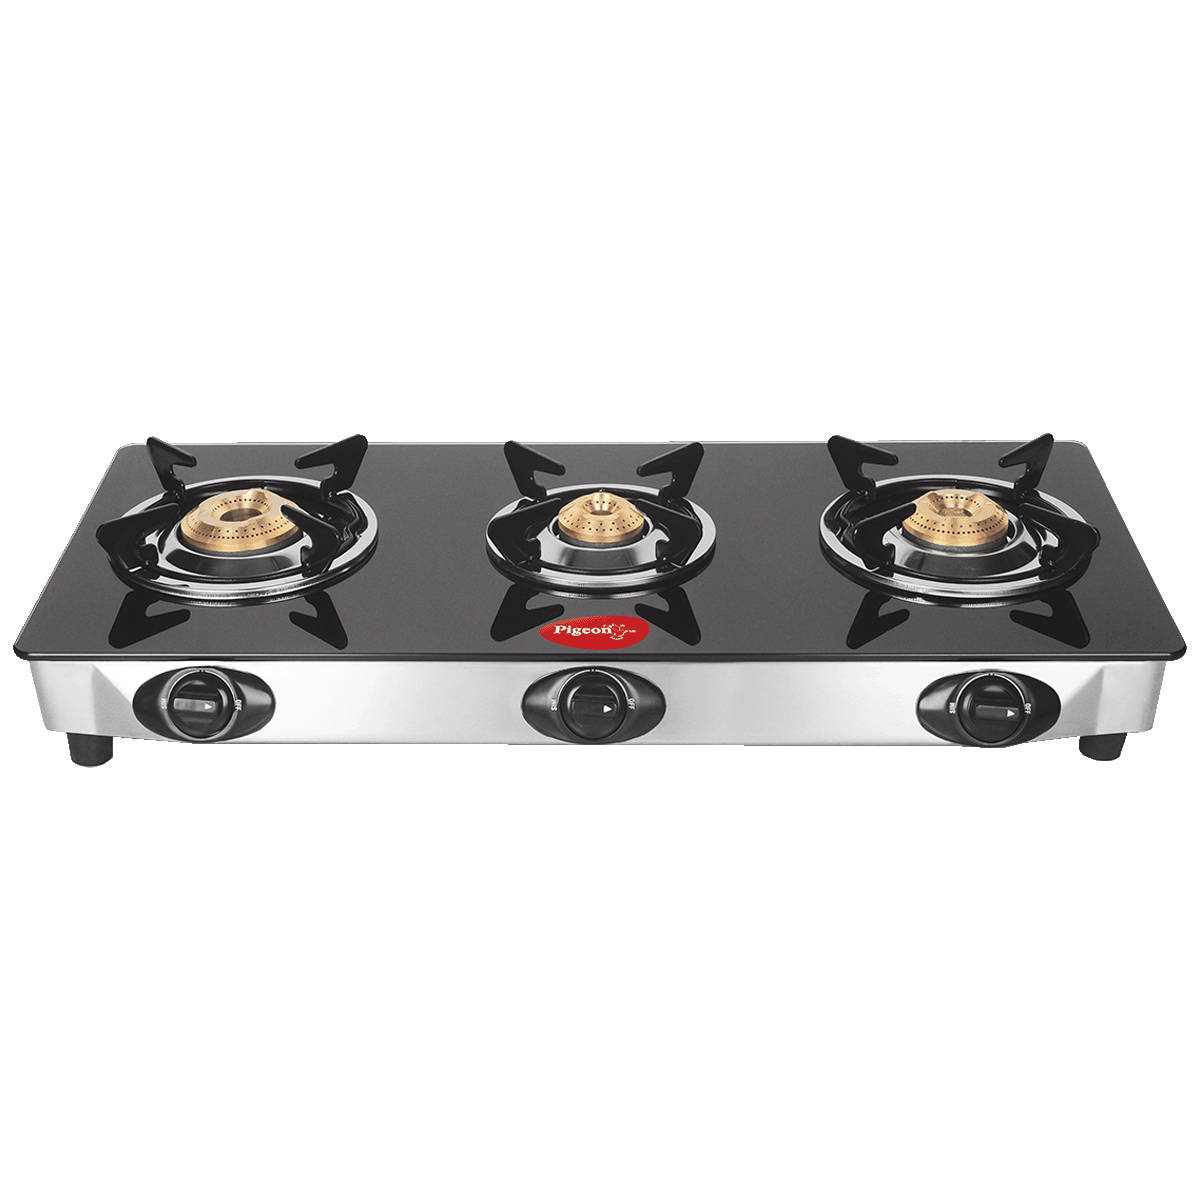 Pigeon Ayush 3 Burner Toughened Glass Gas Stove (Unique Pan Support, 14336, Black)